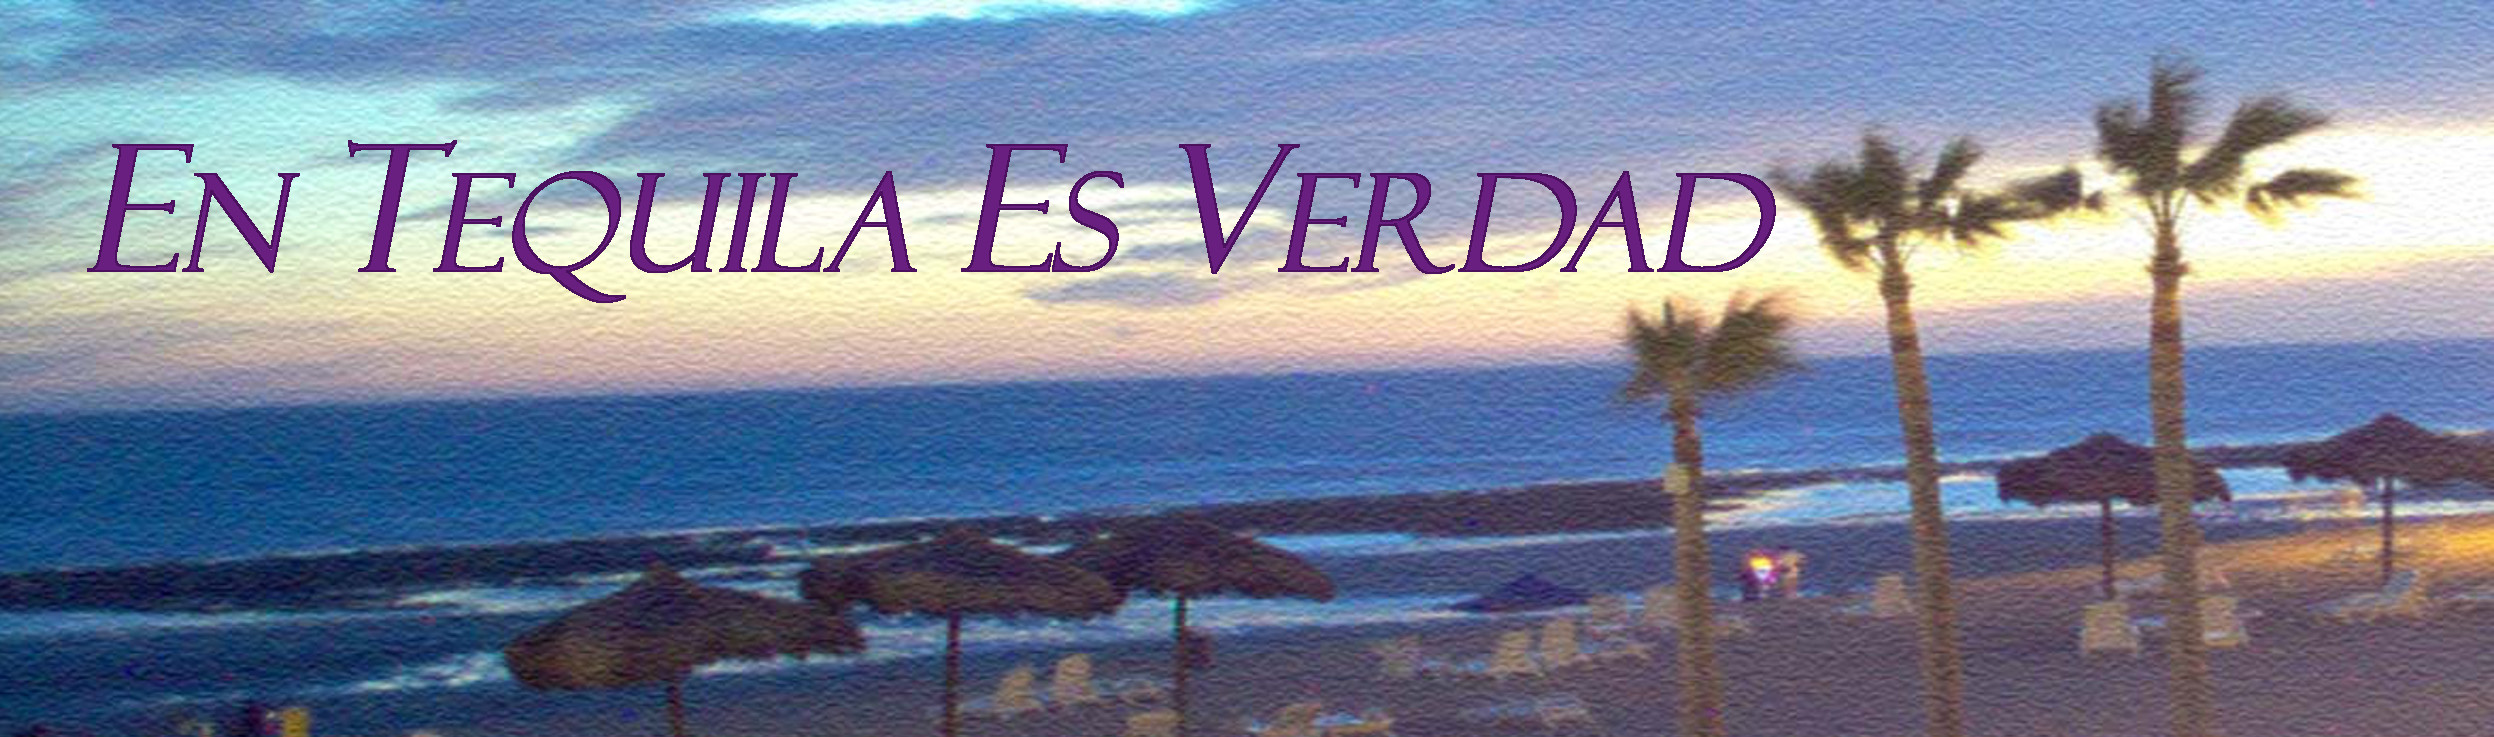 Image shows a beach scene with palm trees and grass umbrellas. Colors are pastel blues and purples with some pink and orange on the sunset horizon over the sea. En Tequila Es Verdad is printed in purple at the top.